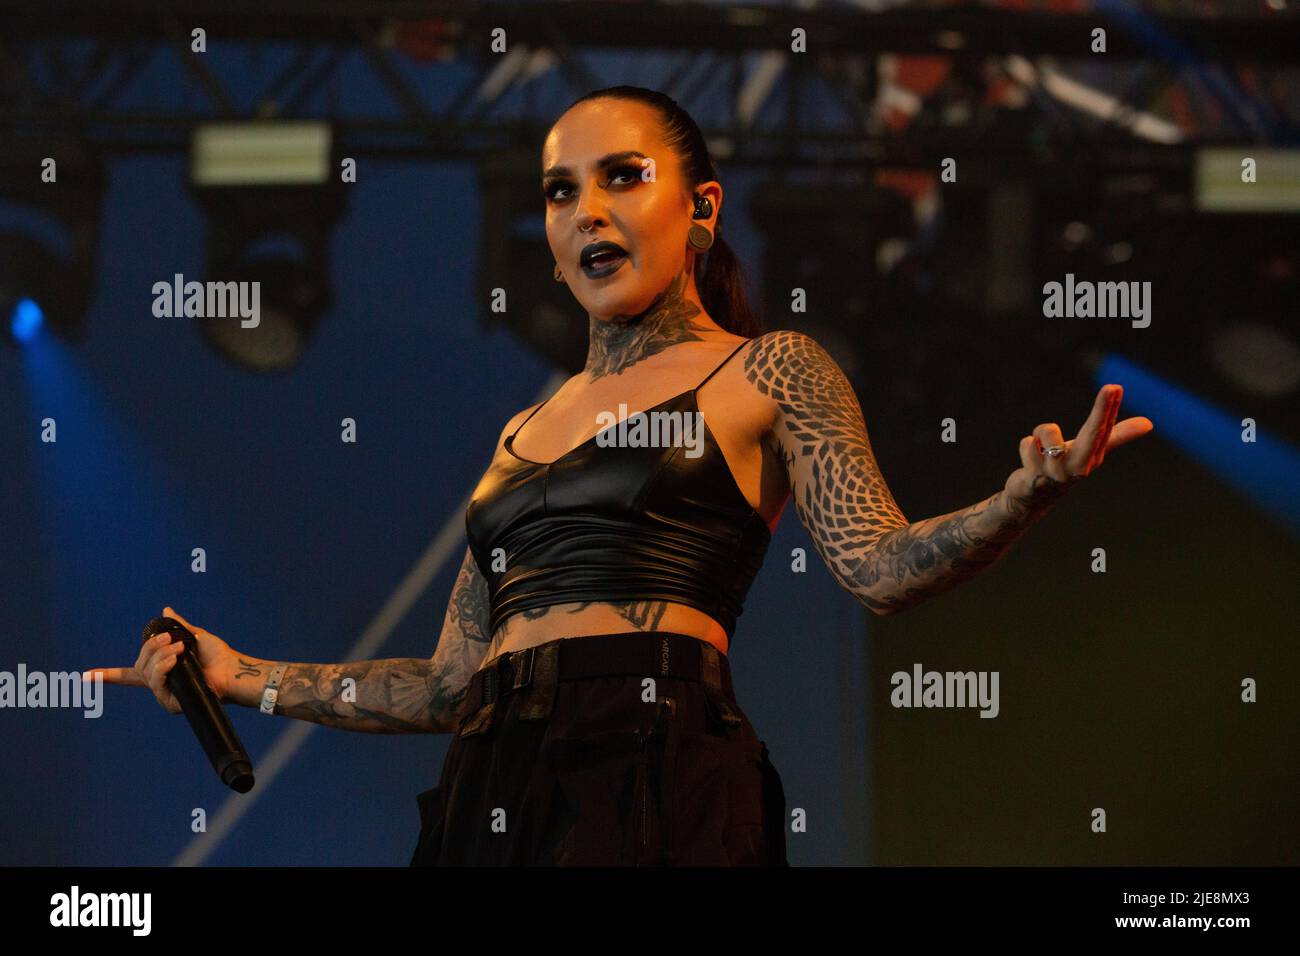 Oslo, Norway. 24th, June 2022. The Ukrainian heavy metal band Jinjer performs a live concert during the Norwegian music festival Tons of Rock 2022 in Oslo. Here vocalist Tatiana Shmailyuk is seen live on stage. (Photo credit: Gonzales Photo - Per-Otto Oppi). Stock Photo